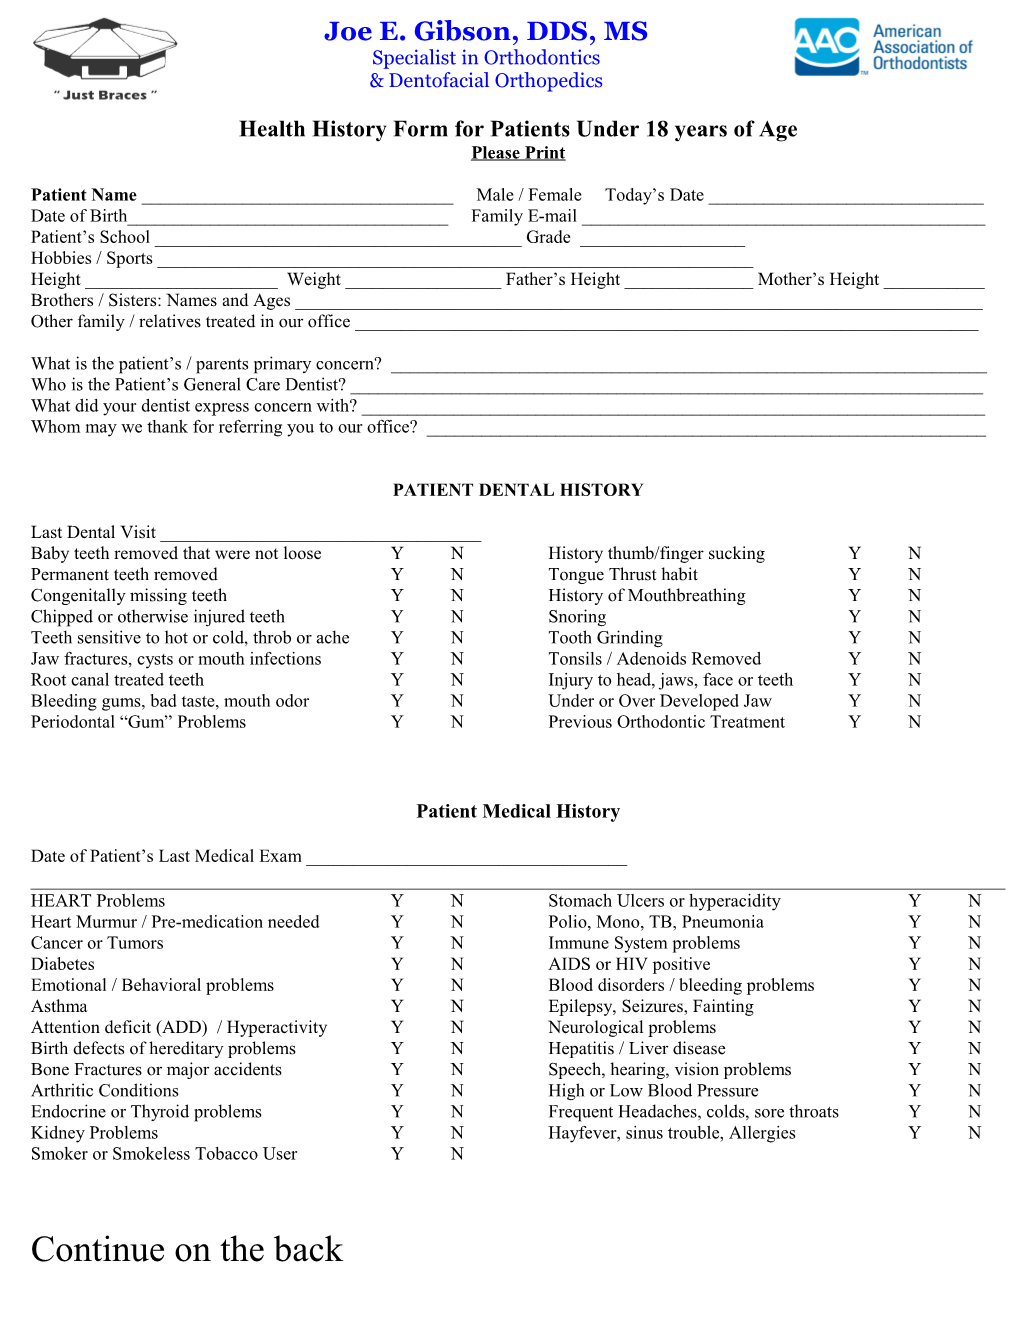 Health History Form for Patients Under 18 Years of Age